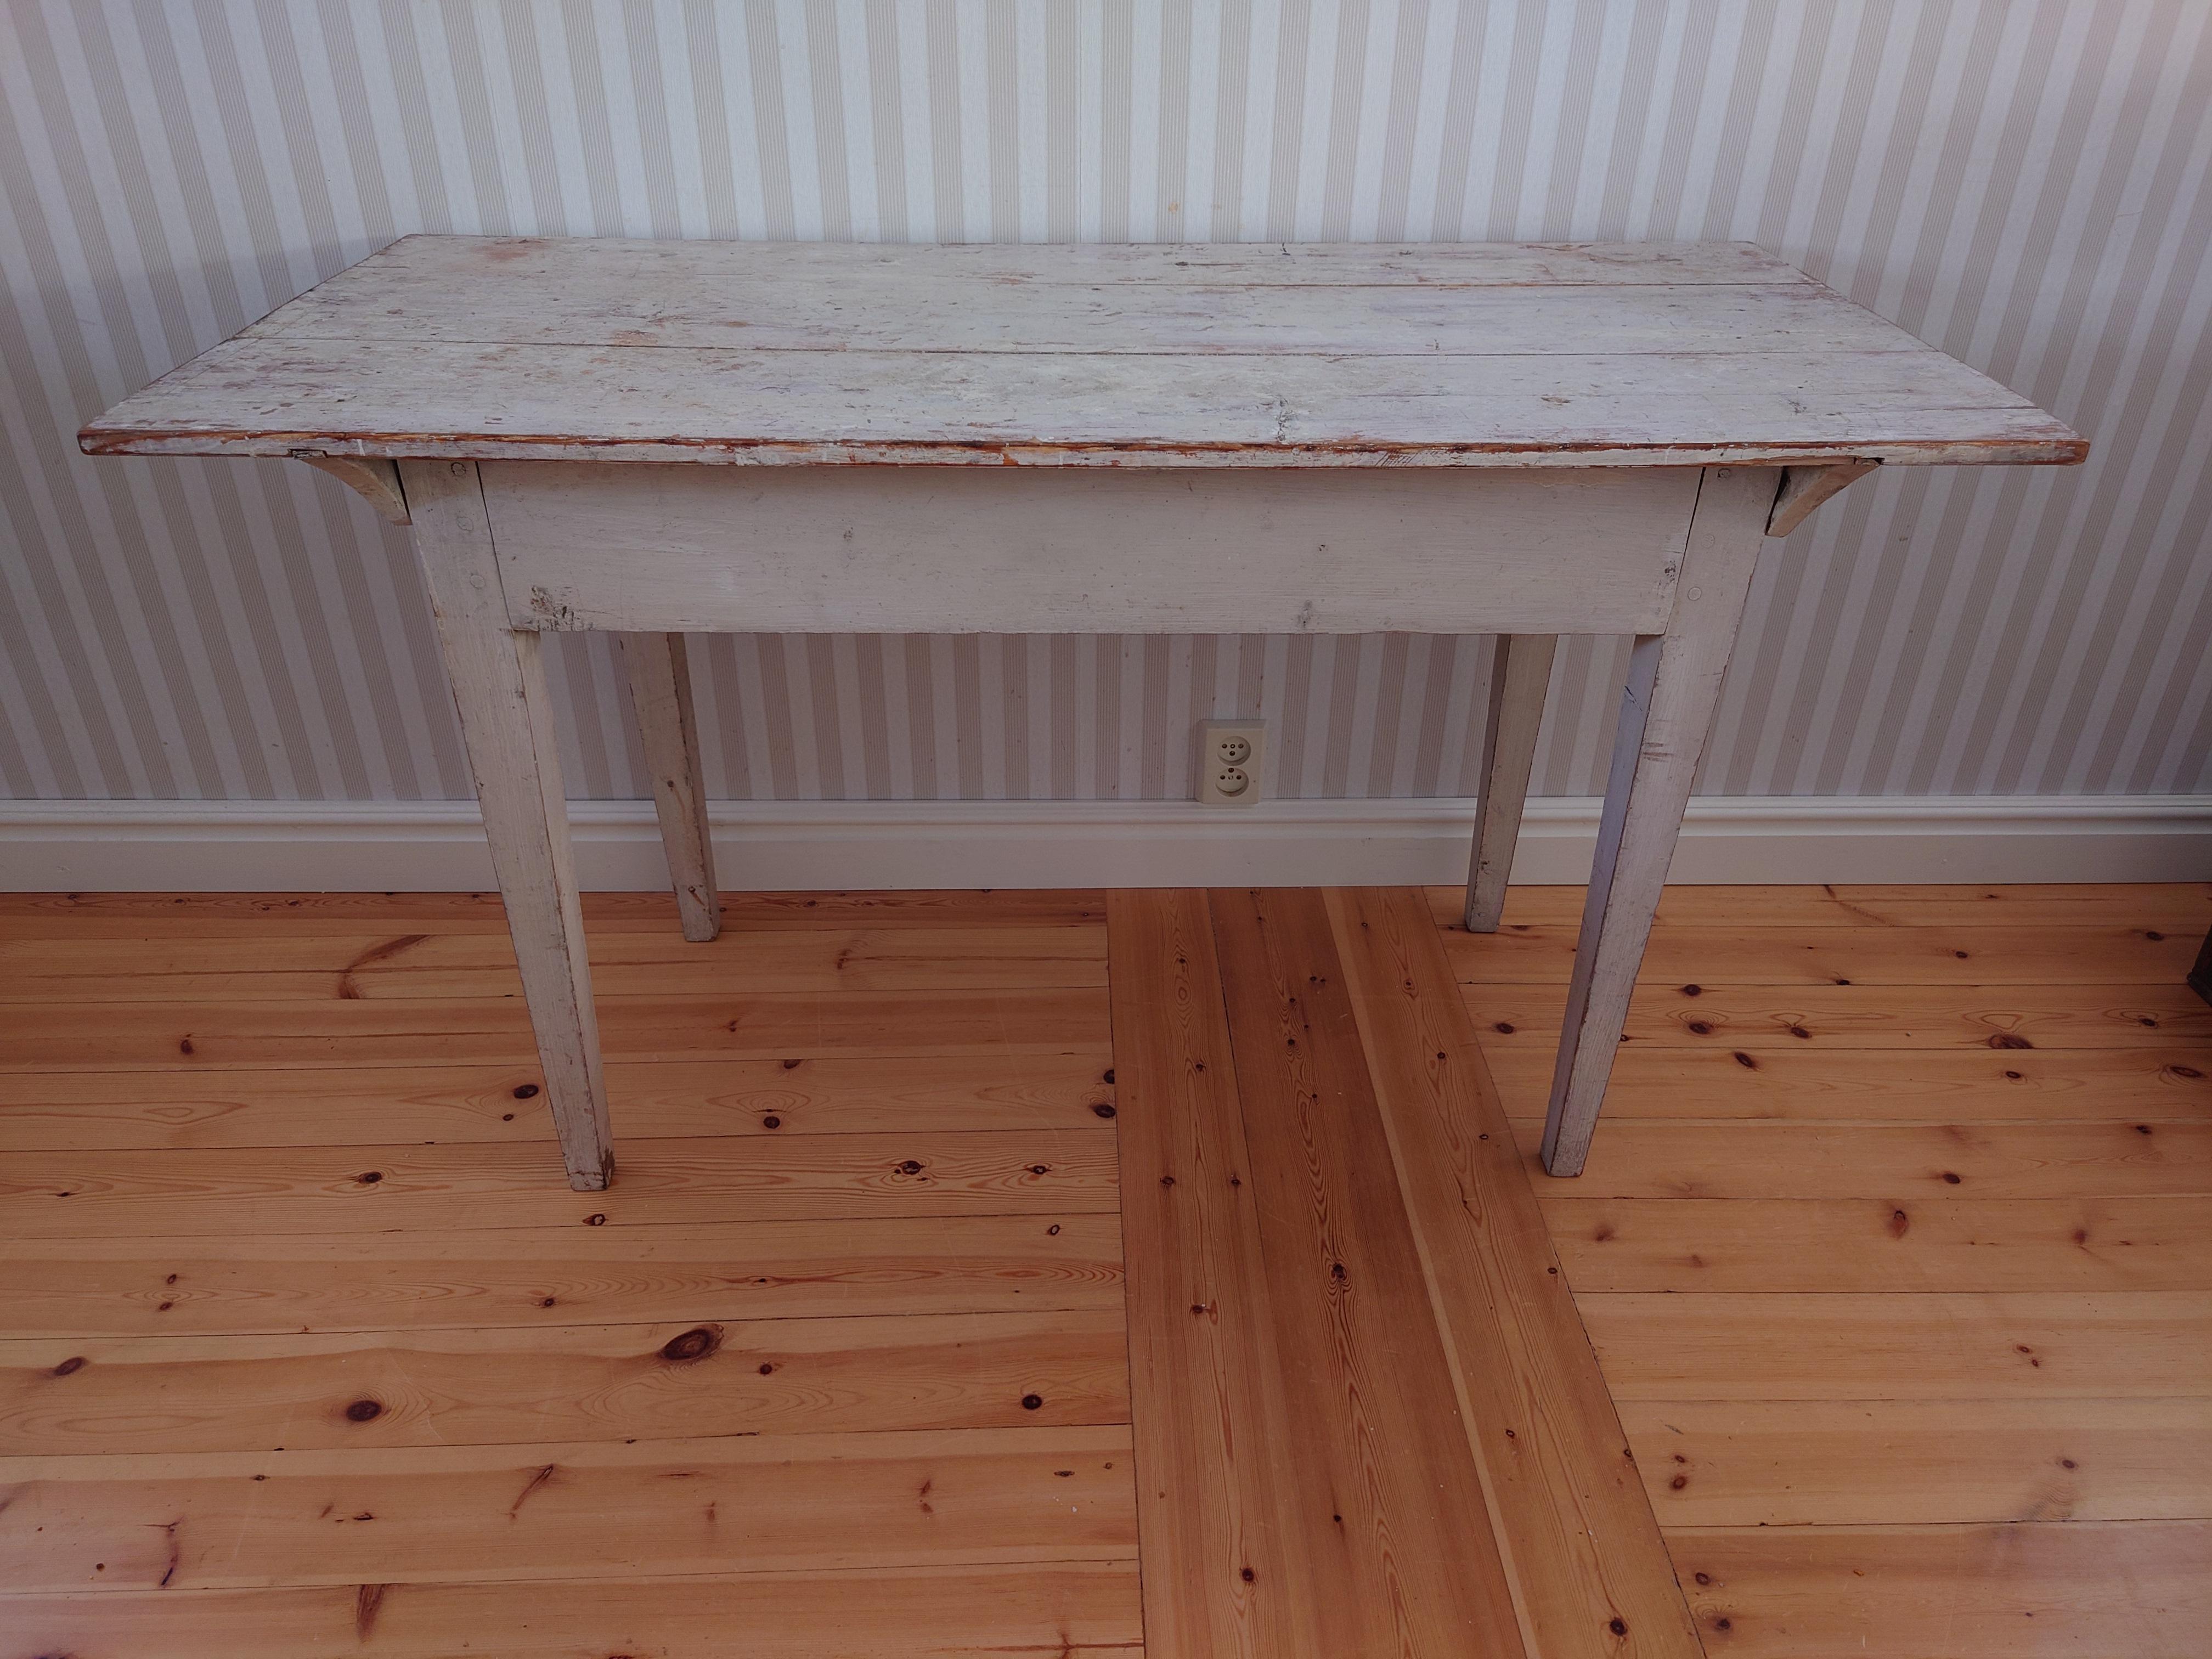  Early 19th Century Swedish antique Rustic Gustavian Provincial table from Skellefteå Västerbotten,Northern Sweden.
The table has untouched original paint.
The table is easy to place &,looks beautiful with your favorite things on it.
Good antique